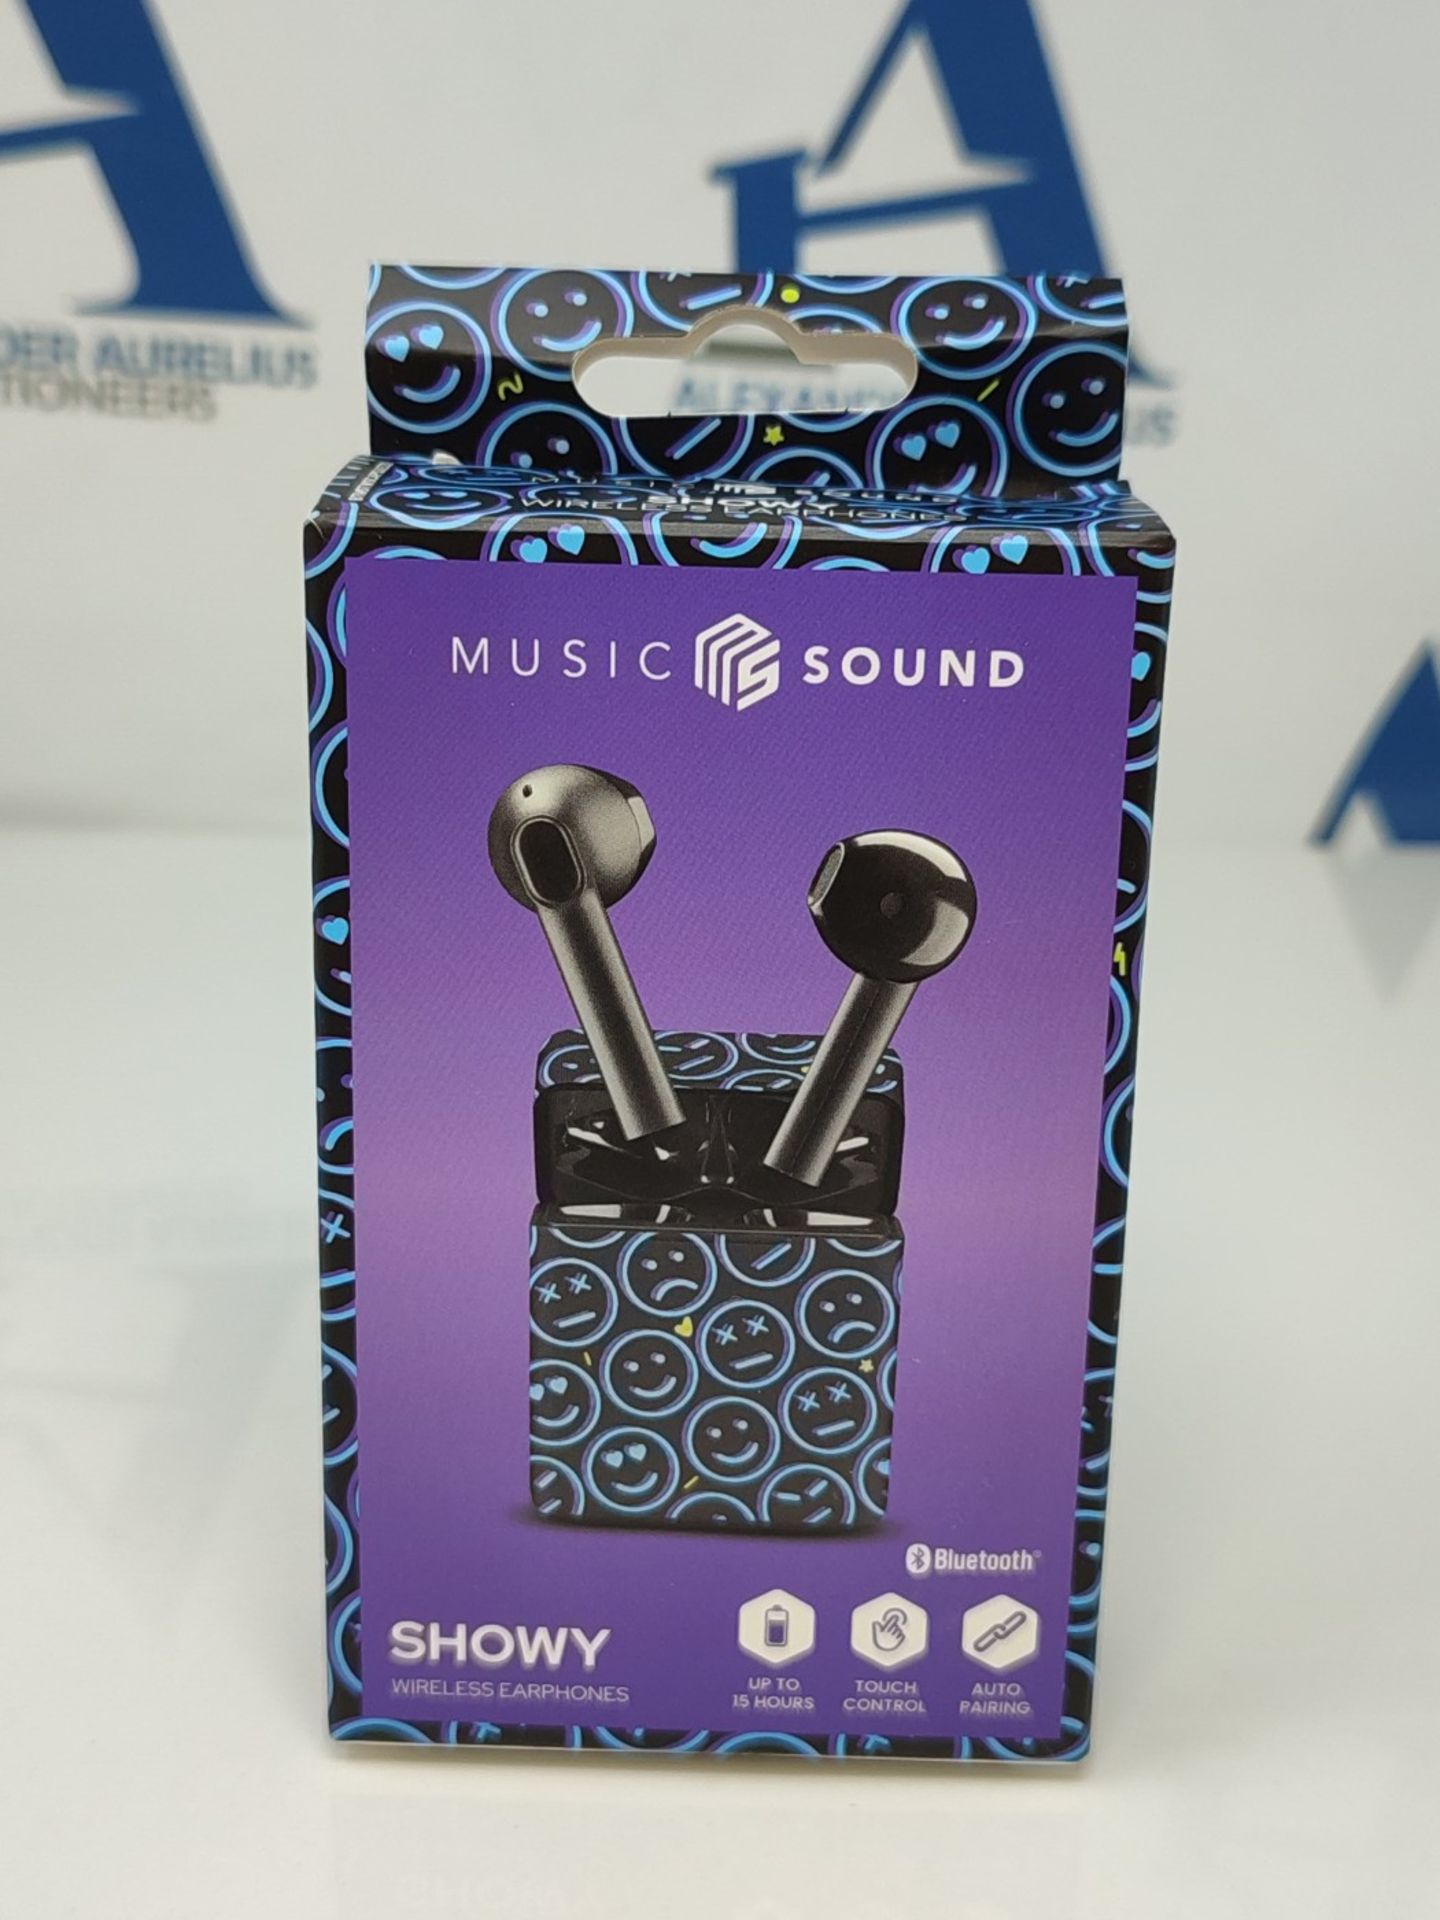 Music Sound - SHOWY - TWS Bluetooth Earbuds in Capsule, with Charging Case in various - Image 2 of 3